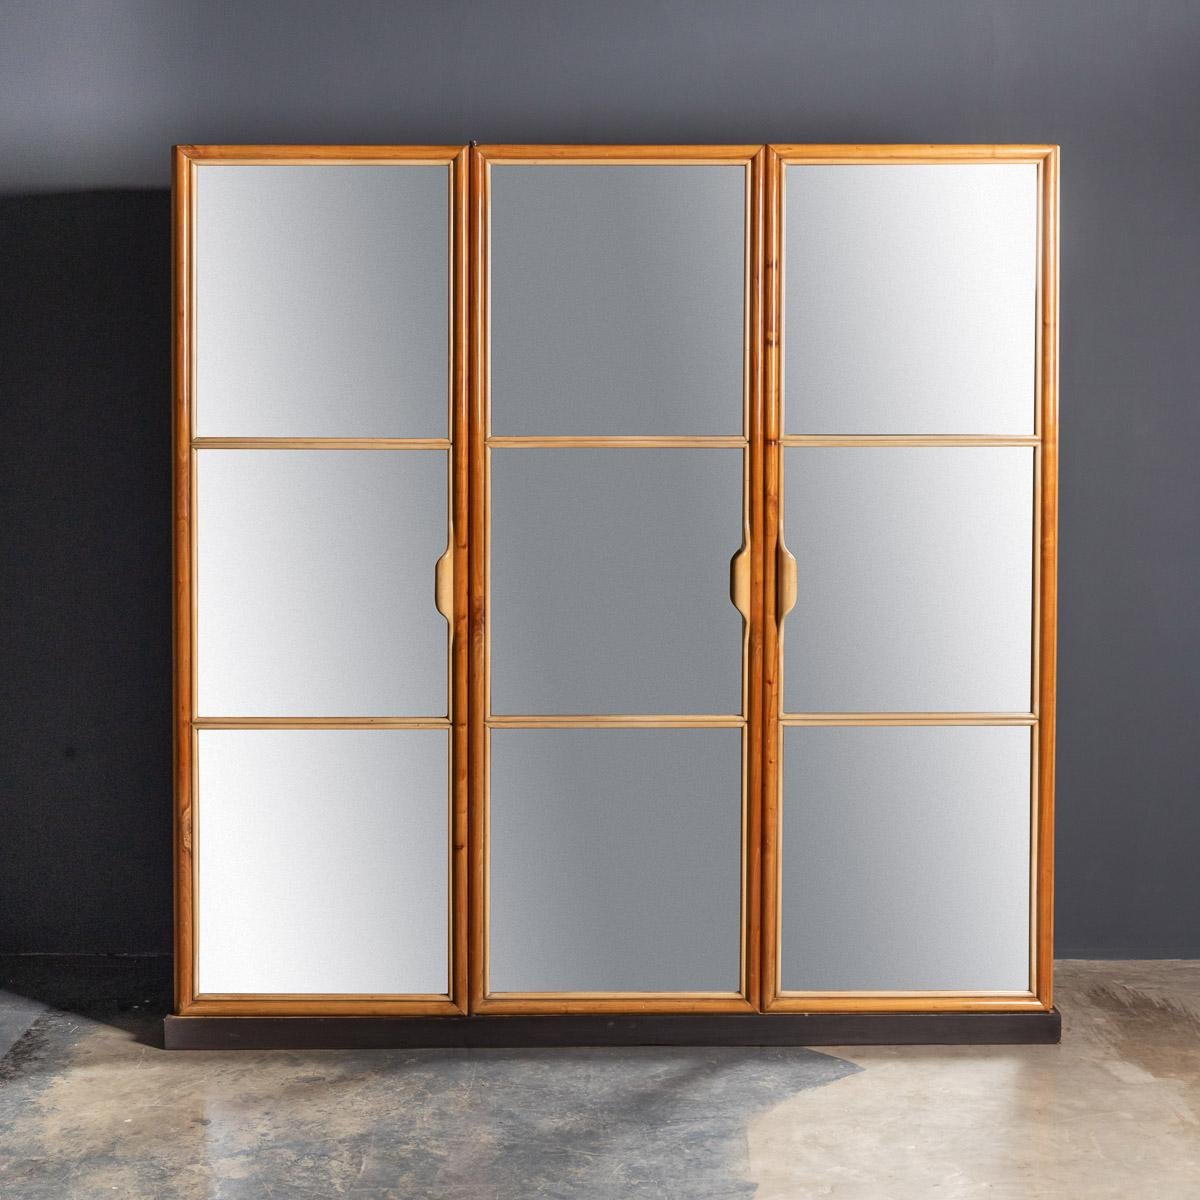 Striking mid-20th century Italian three-door mirrored wardrobe by La Permanente Mobili Cantu, with linenfold detailed sides. On the inside, 4 adjustable shelves, 5 drawers, and hanging space, 2 original keys. Beautiful piece of furniture, looking